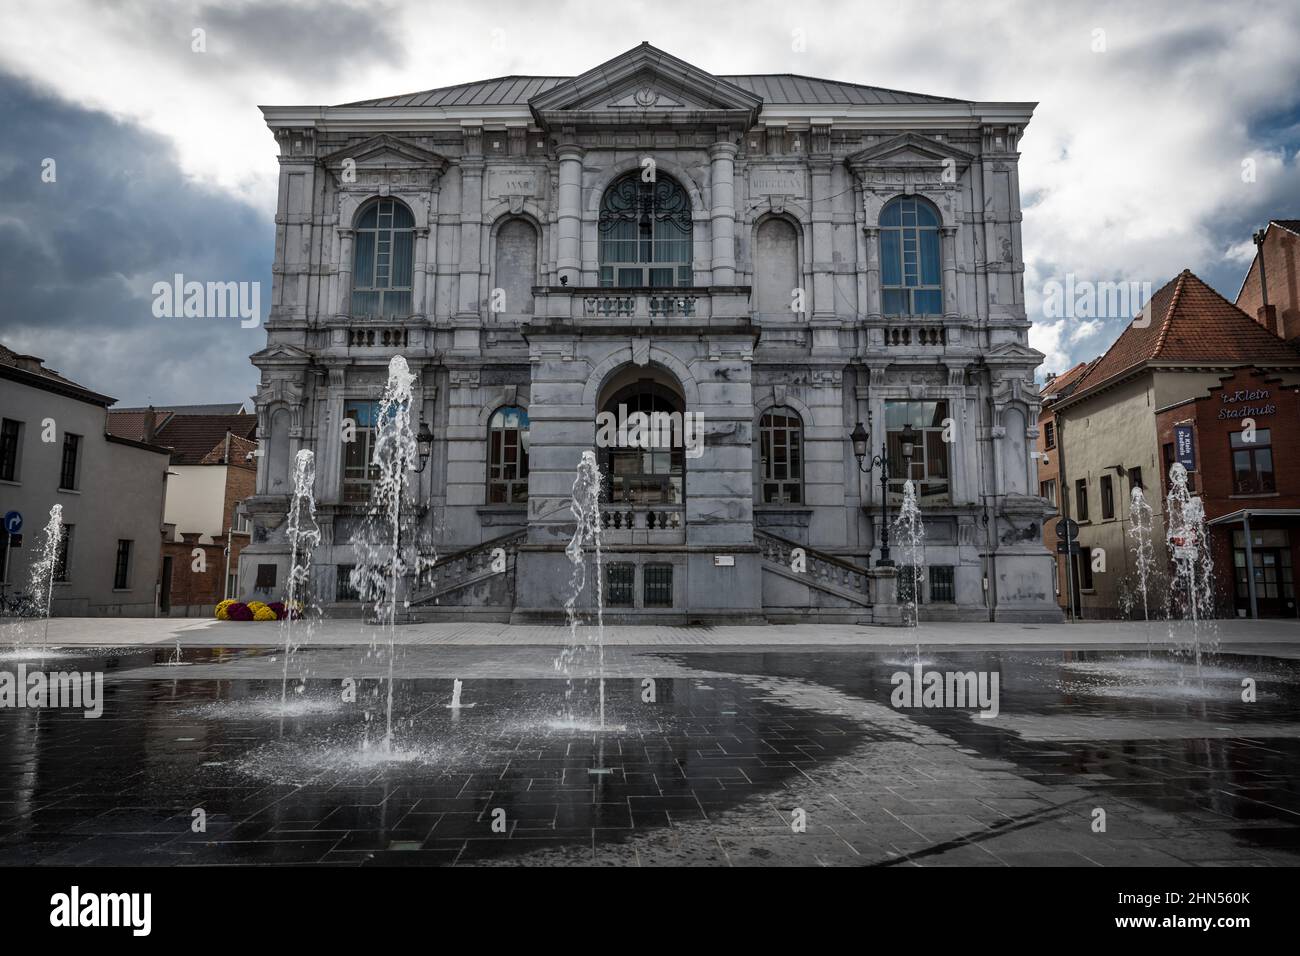 Vilvoorde, Flanders / Belgium - 10 29 2018: Fountain and town hall at the city market square Stock Photo